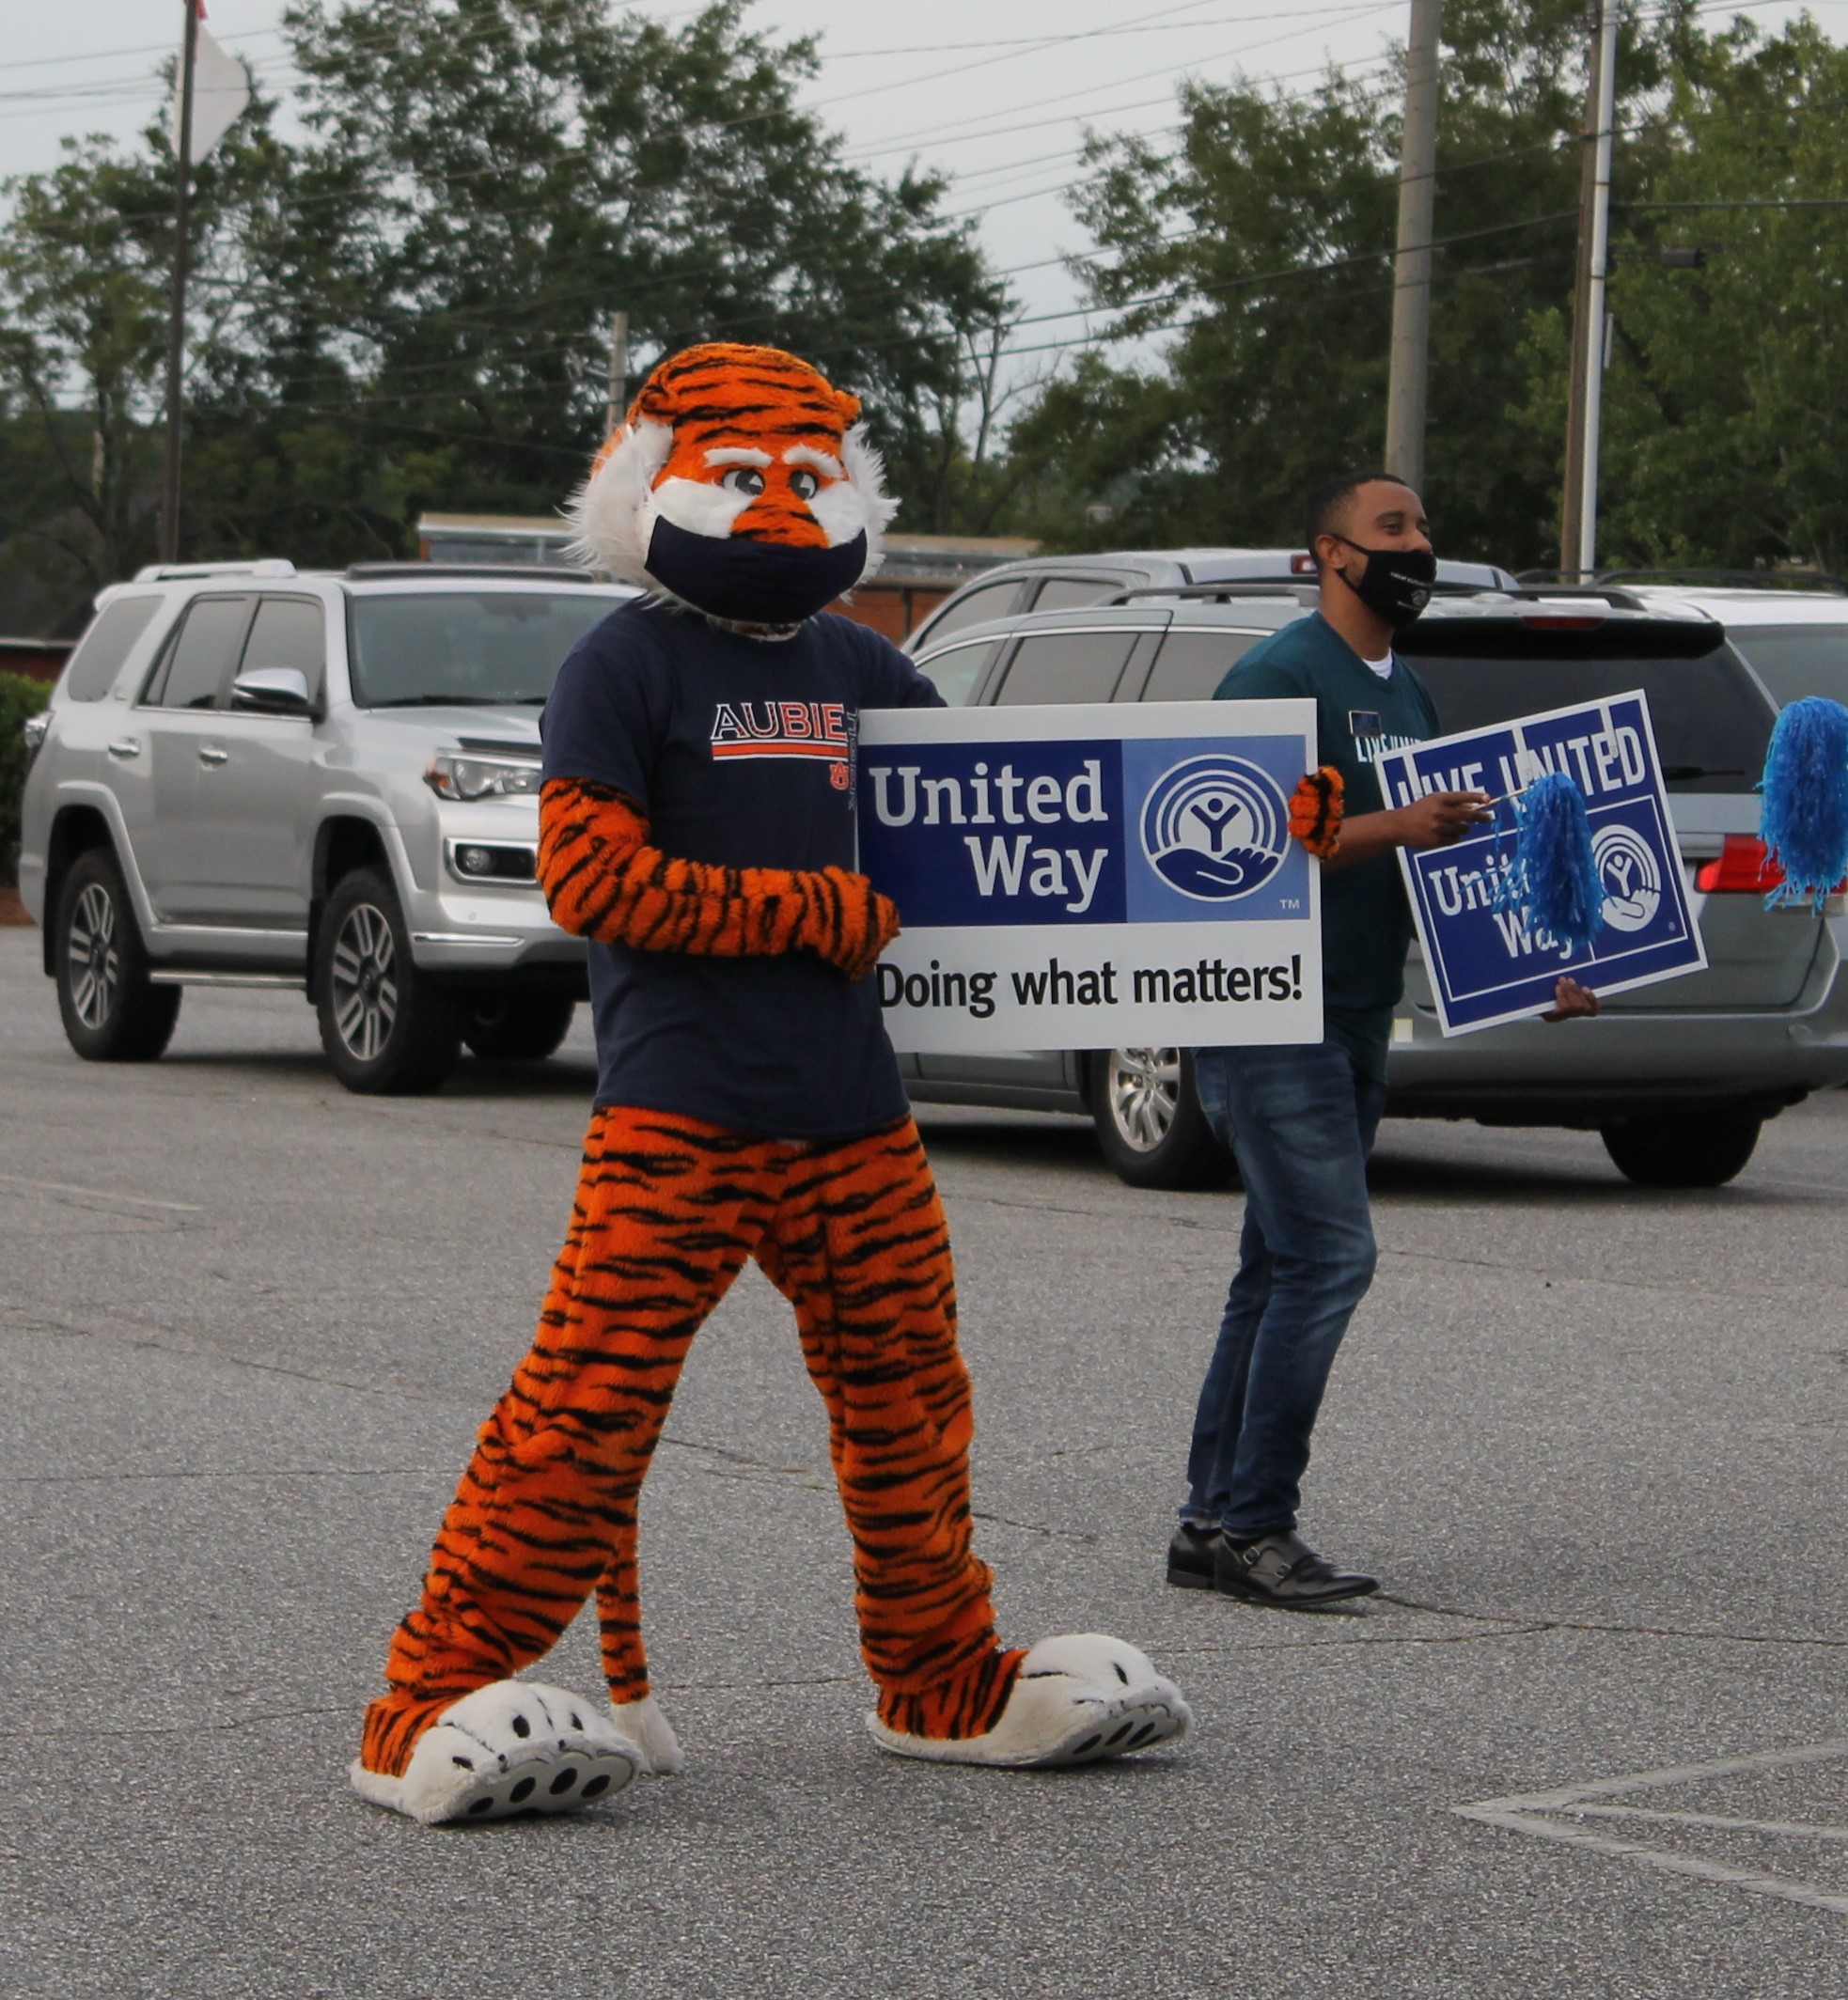 Aubie holding a live united sign